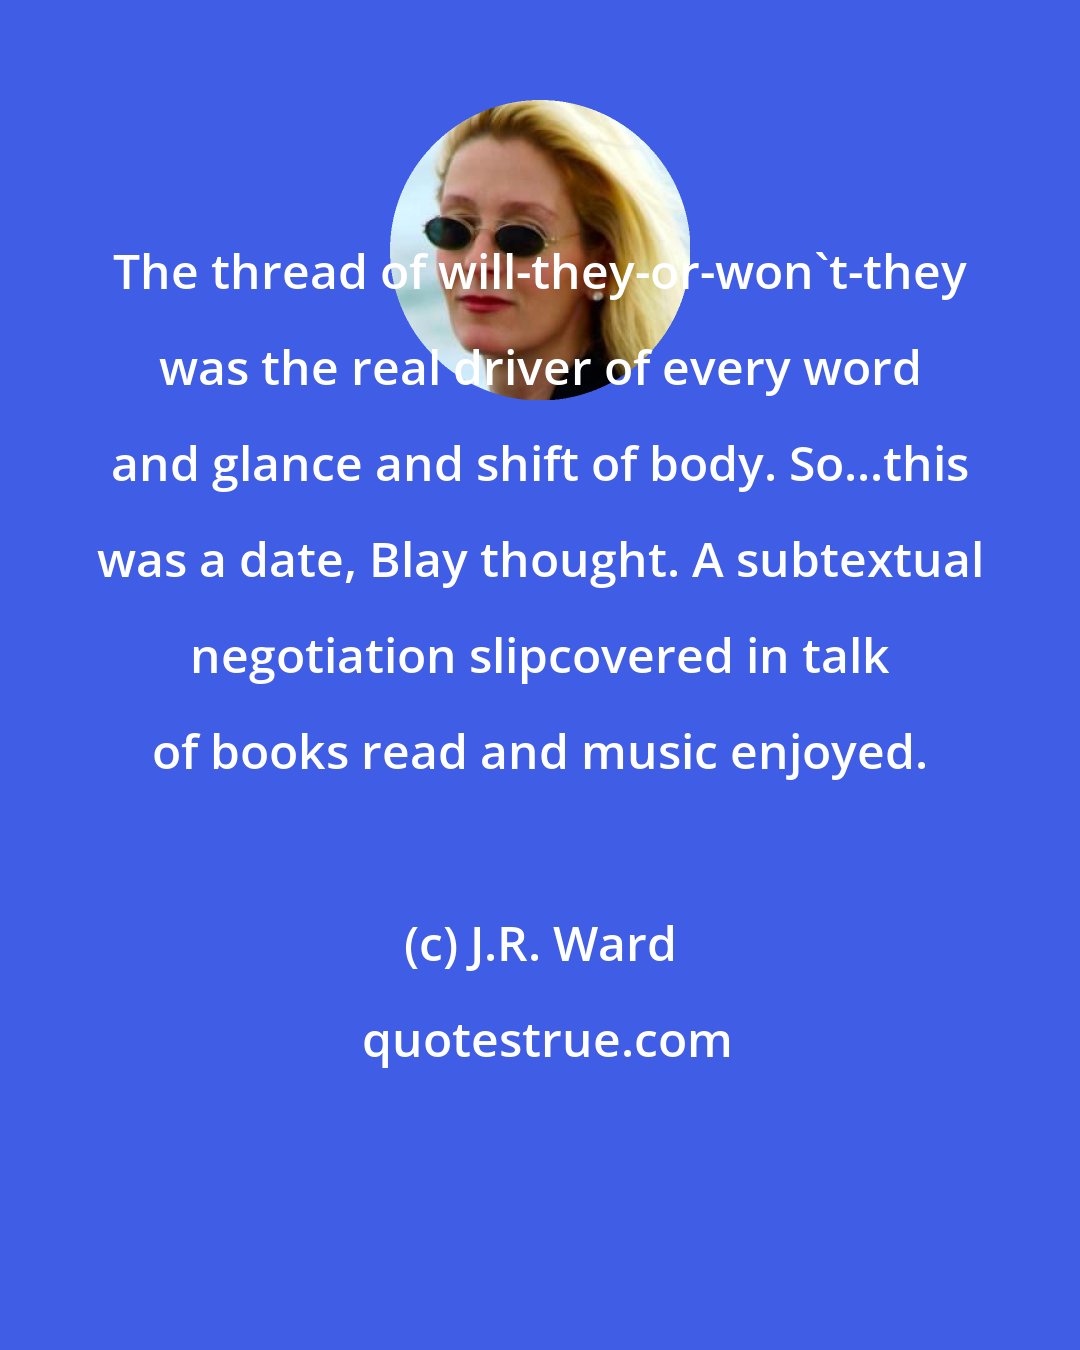 J.R. Ward: The thread of will-they-or-won't-they was the real driver of every word and glance and shift of body. So...this was a date, Blay thought. A subtextual negotiation slipcovered in talk of books read and music enjoyed.